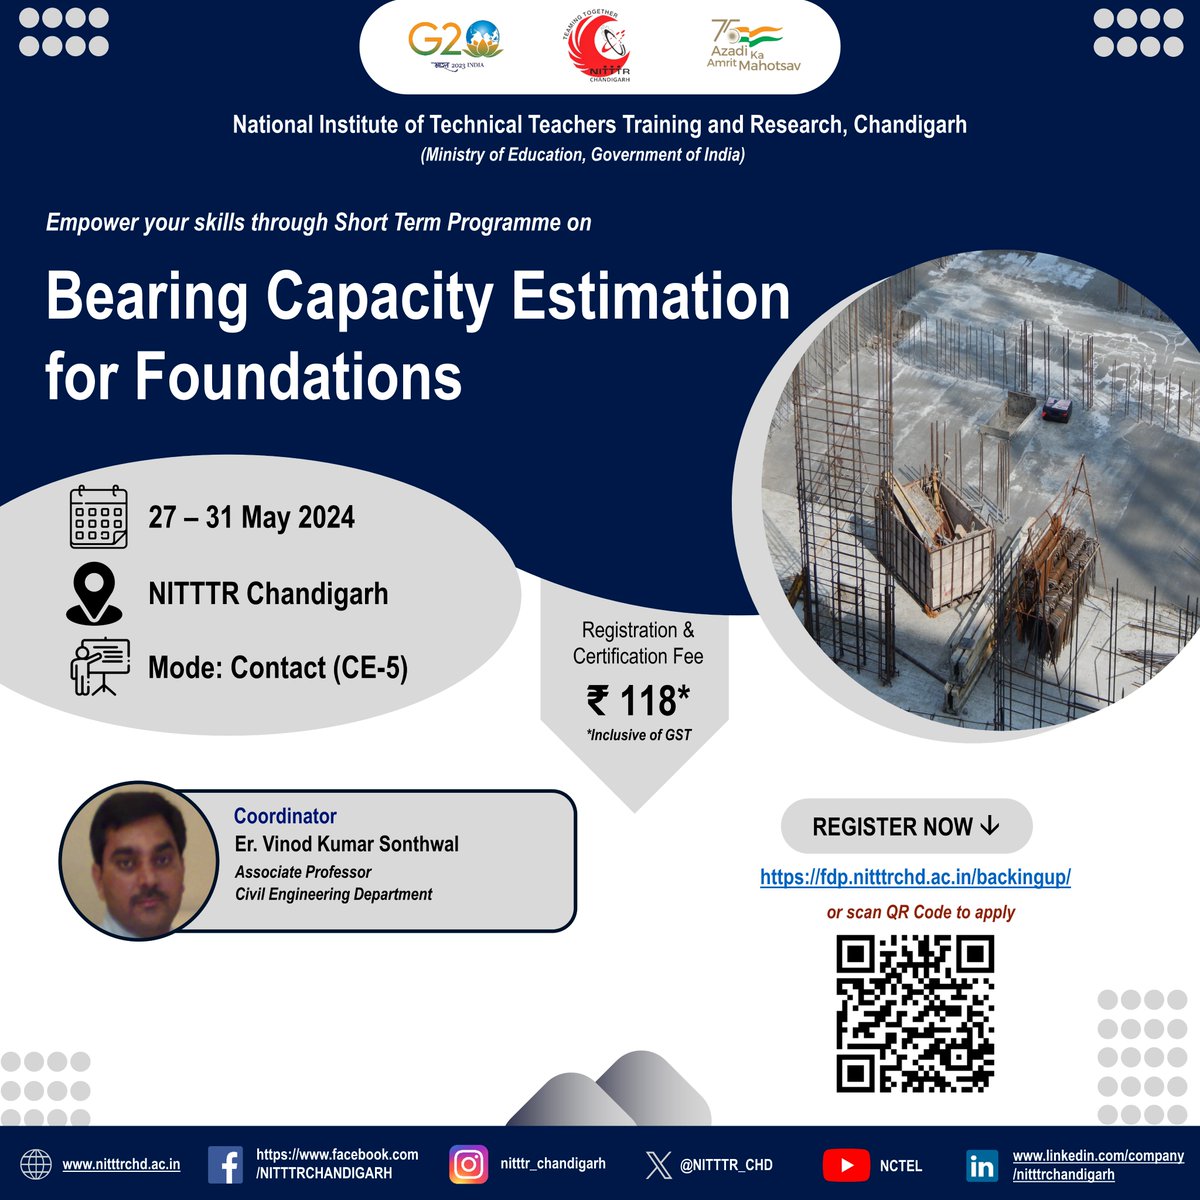 Join us for a 1 Week course on Bearing Capacity Estimation for Foundations to be organized by the Civil Engineering Dept. from 27-31 May'24. Interested faculty & staff members may apply at fdp.nitttrchd.ac.in/backingup/ #nitttrchd #BearingCapacity #FoundationDesign #CivilEngineering